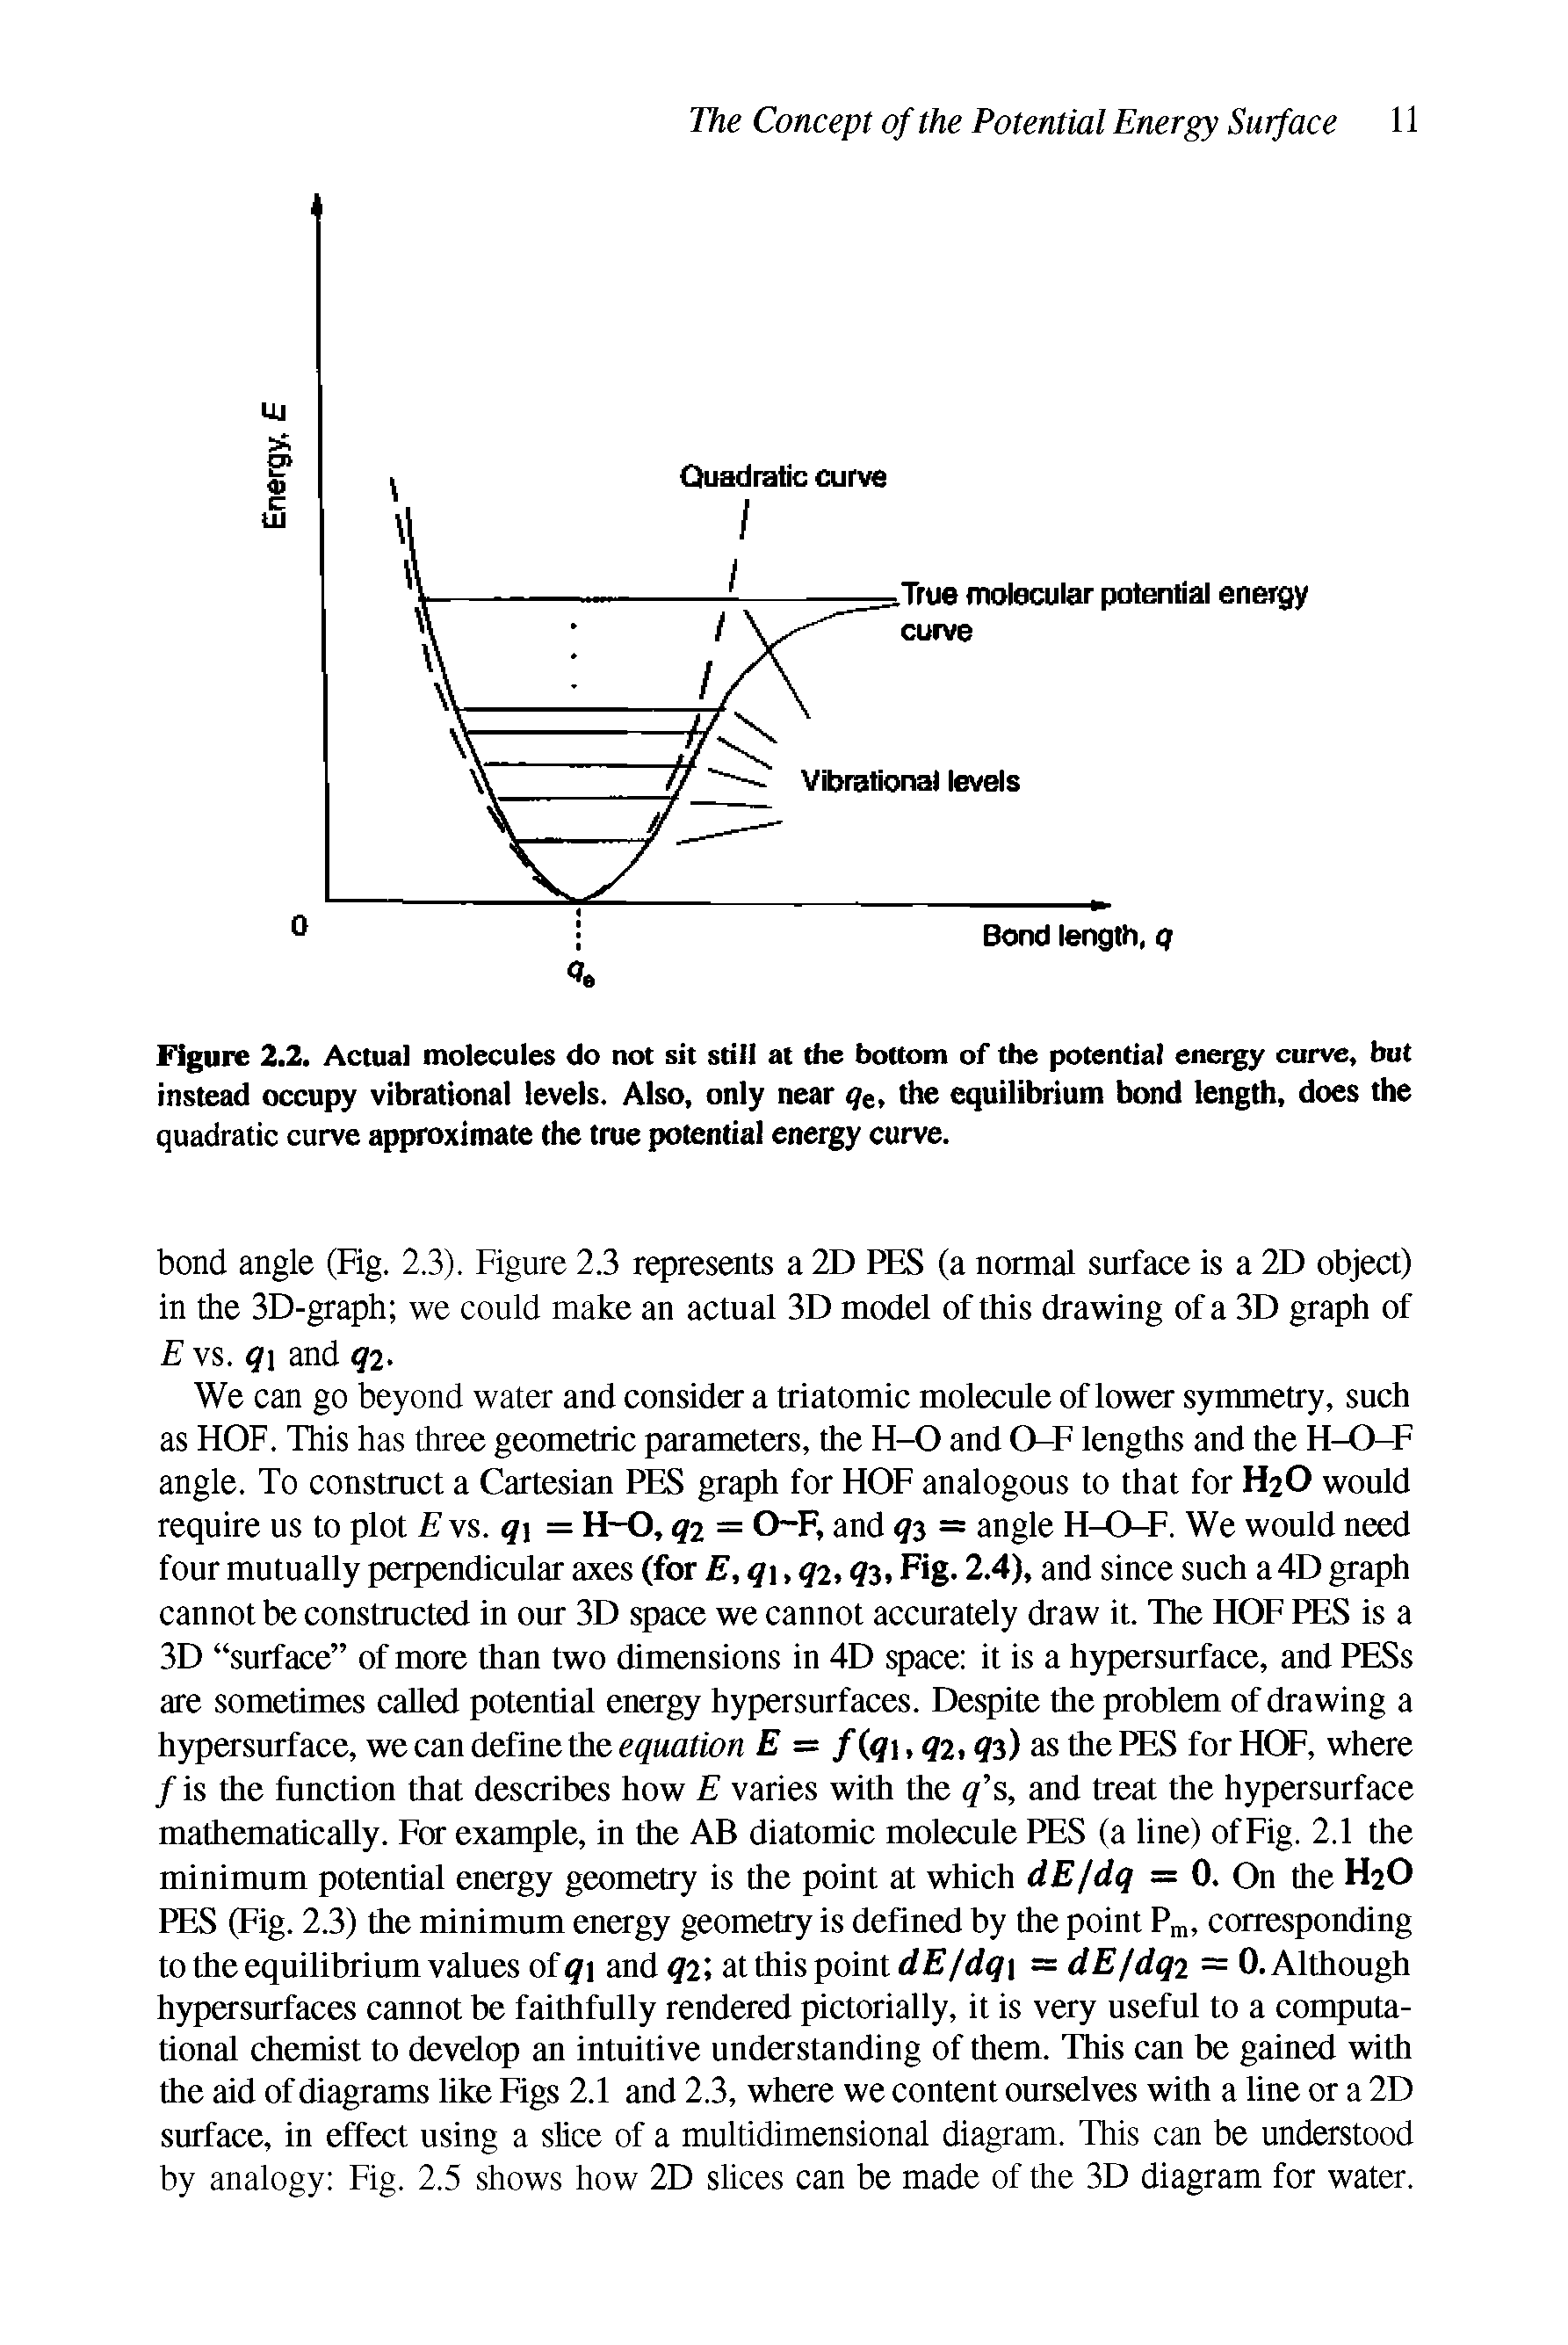 Figure 2.2. Actual molecules do not sit still at the bottom of the potential eneigy curve, but instead occupy vibrational levels. Also, only near qe, the equilibrium bond length, does the quadratic curve approximate the true potential energy curve.